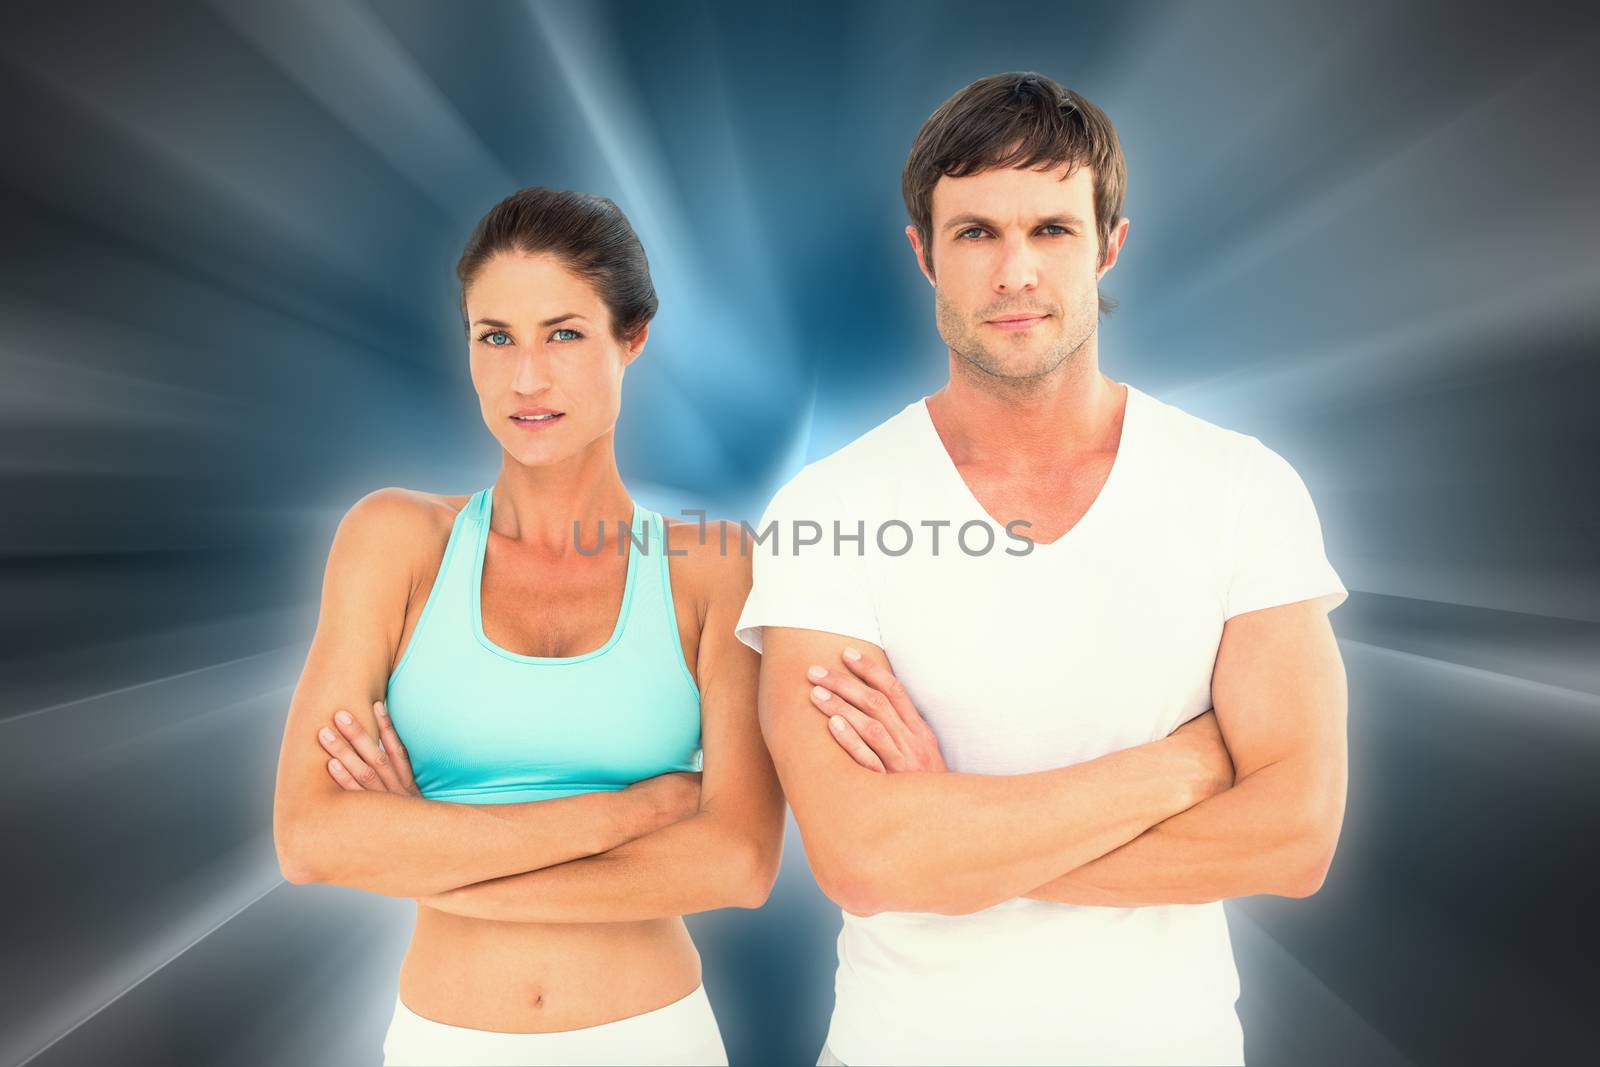 Portrait of a fit young couple with arms crossed against abstract background